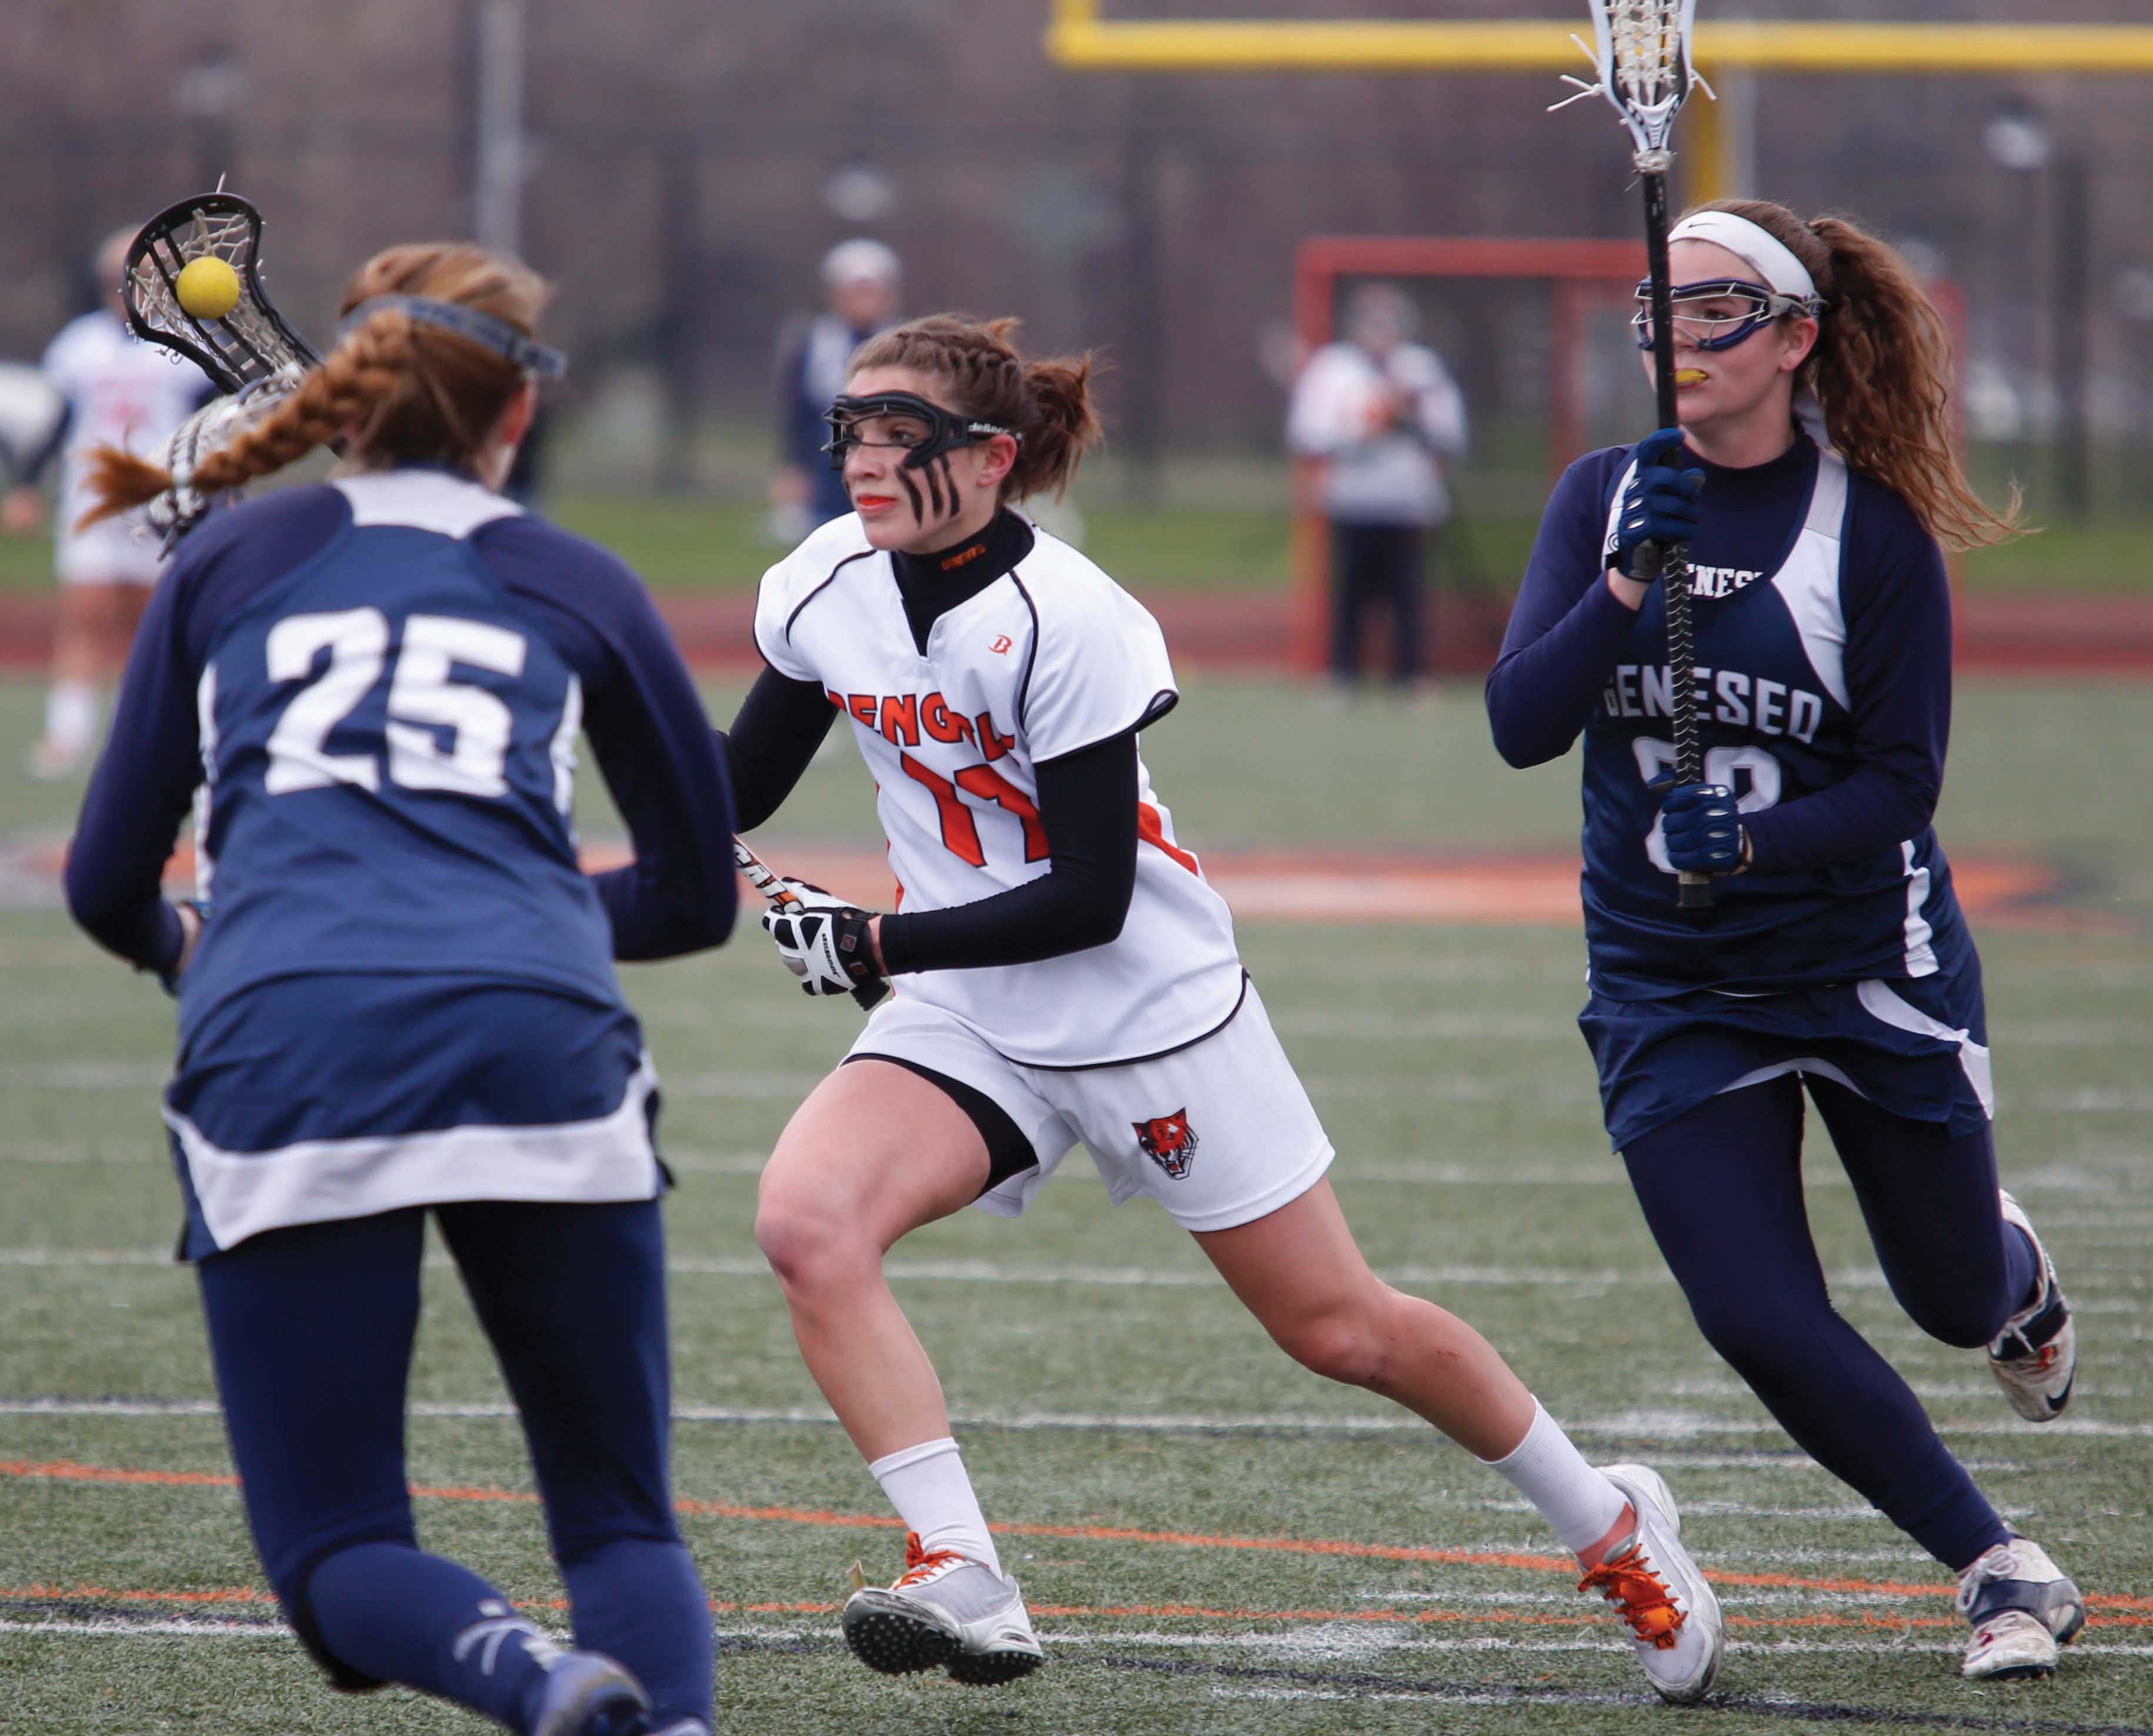 Woman's lacrosse moving foreword after losing weekend - The Record